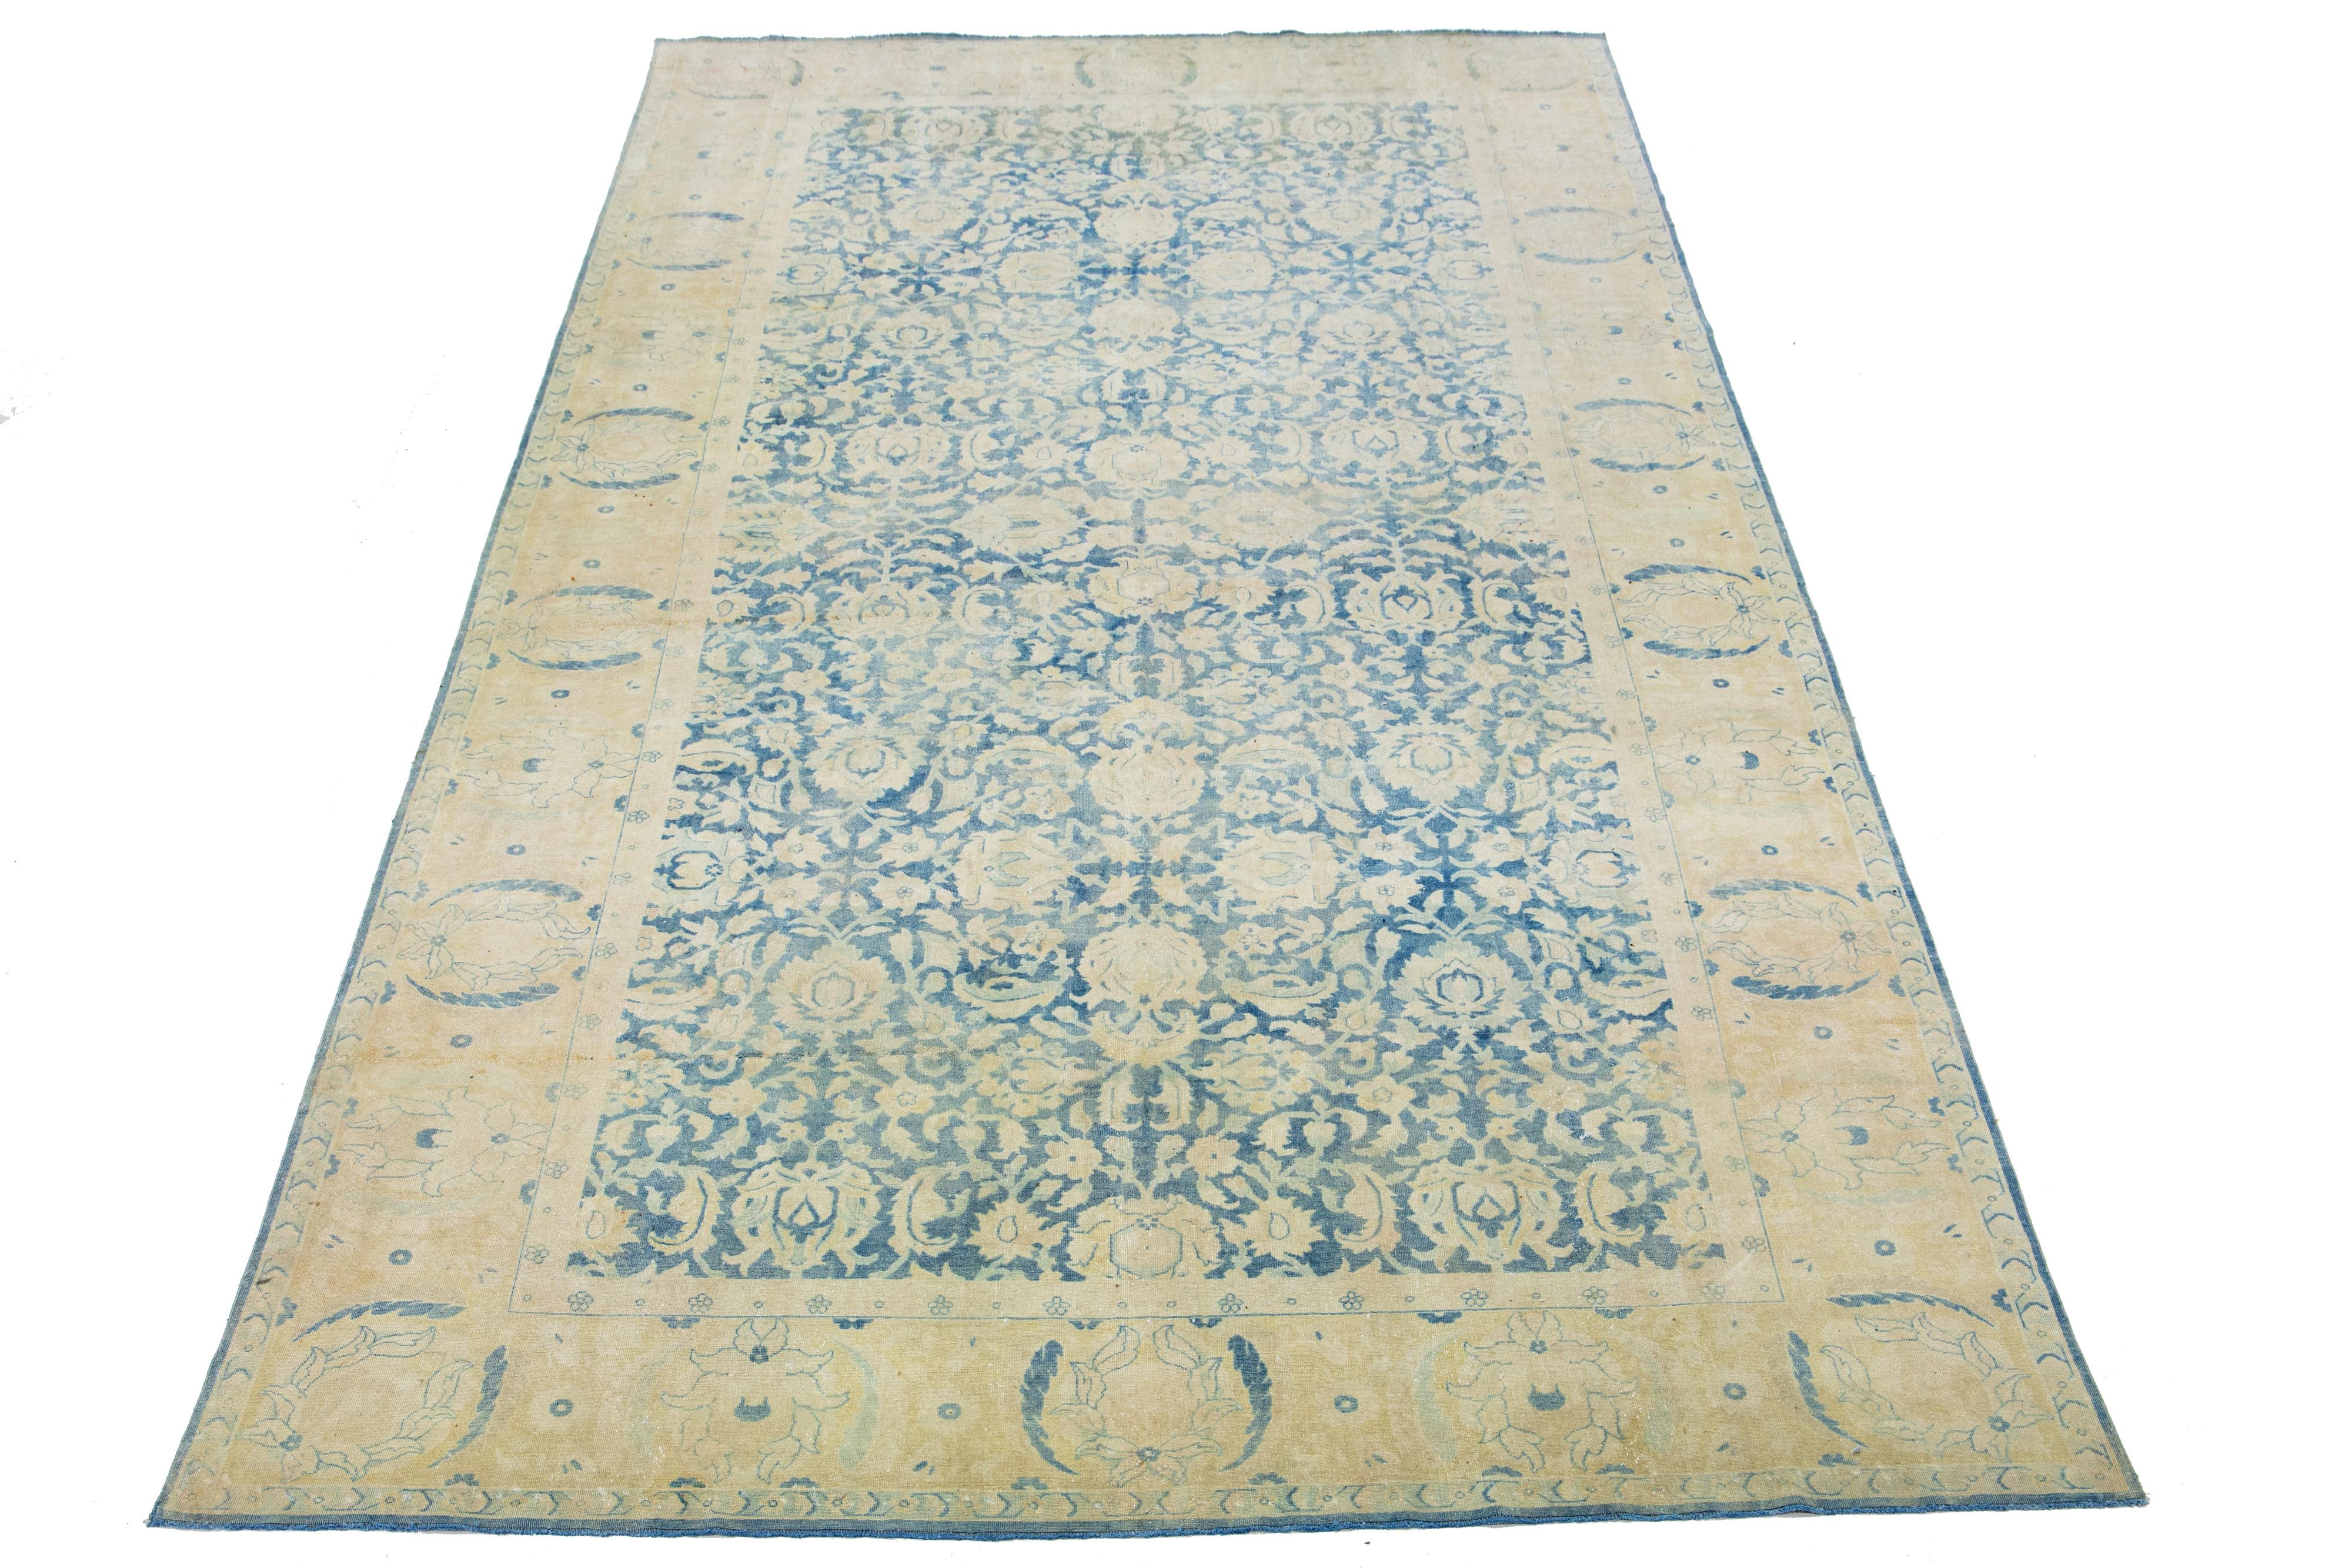 Beautiful hand-knotted antique Agra wool rug with a blue color field. This Indian rug has beige accent colors in an all-over floral design. 

This rug measures 8'8